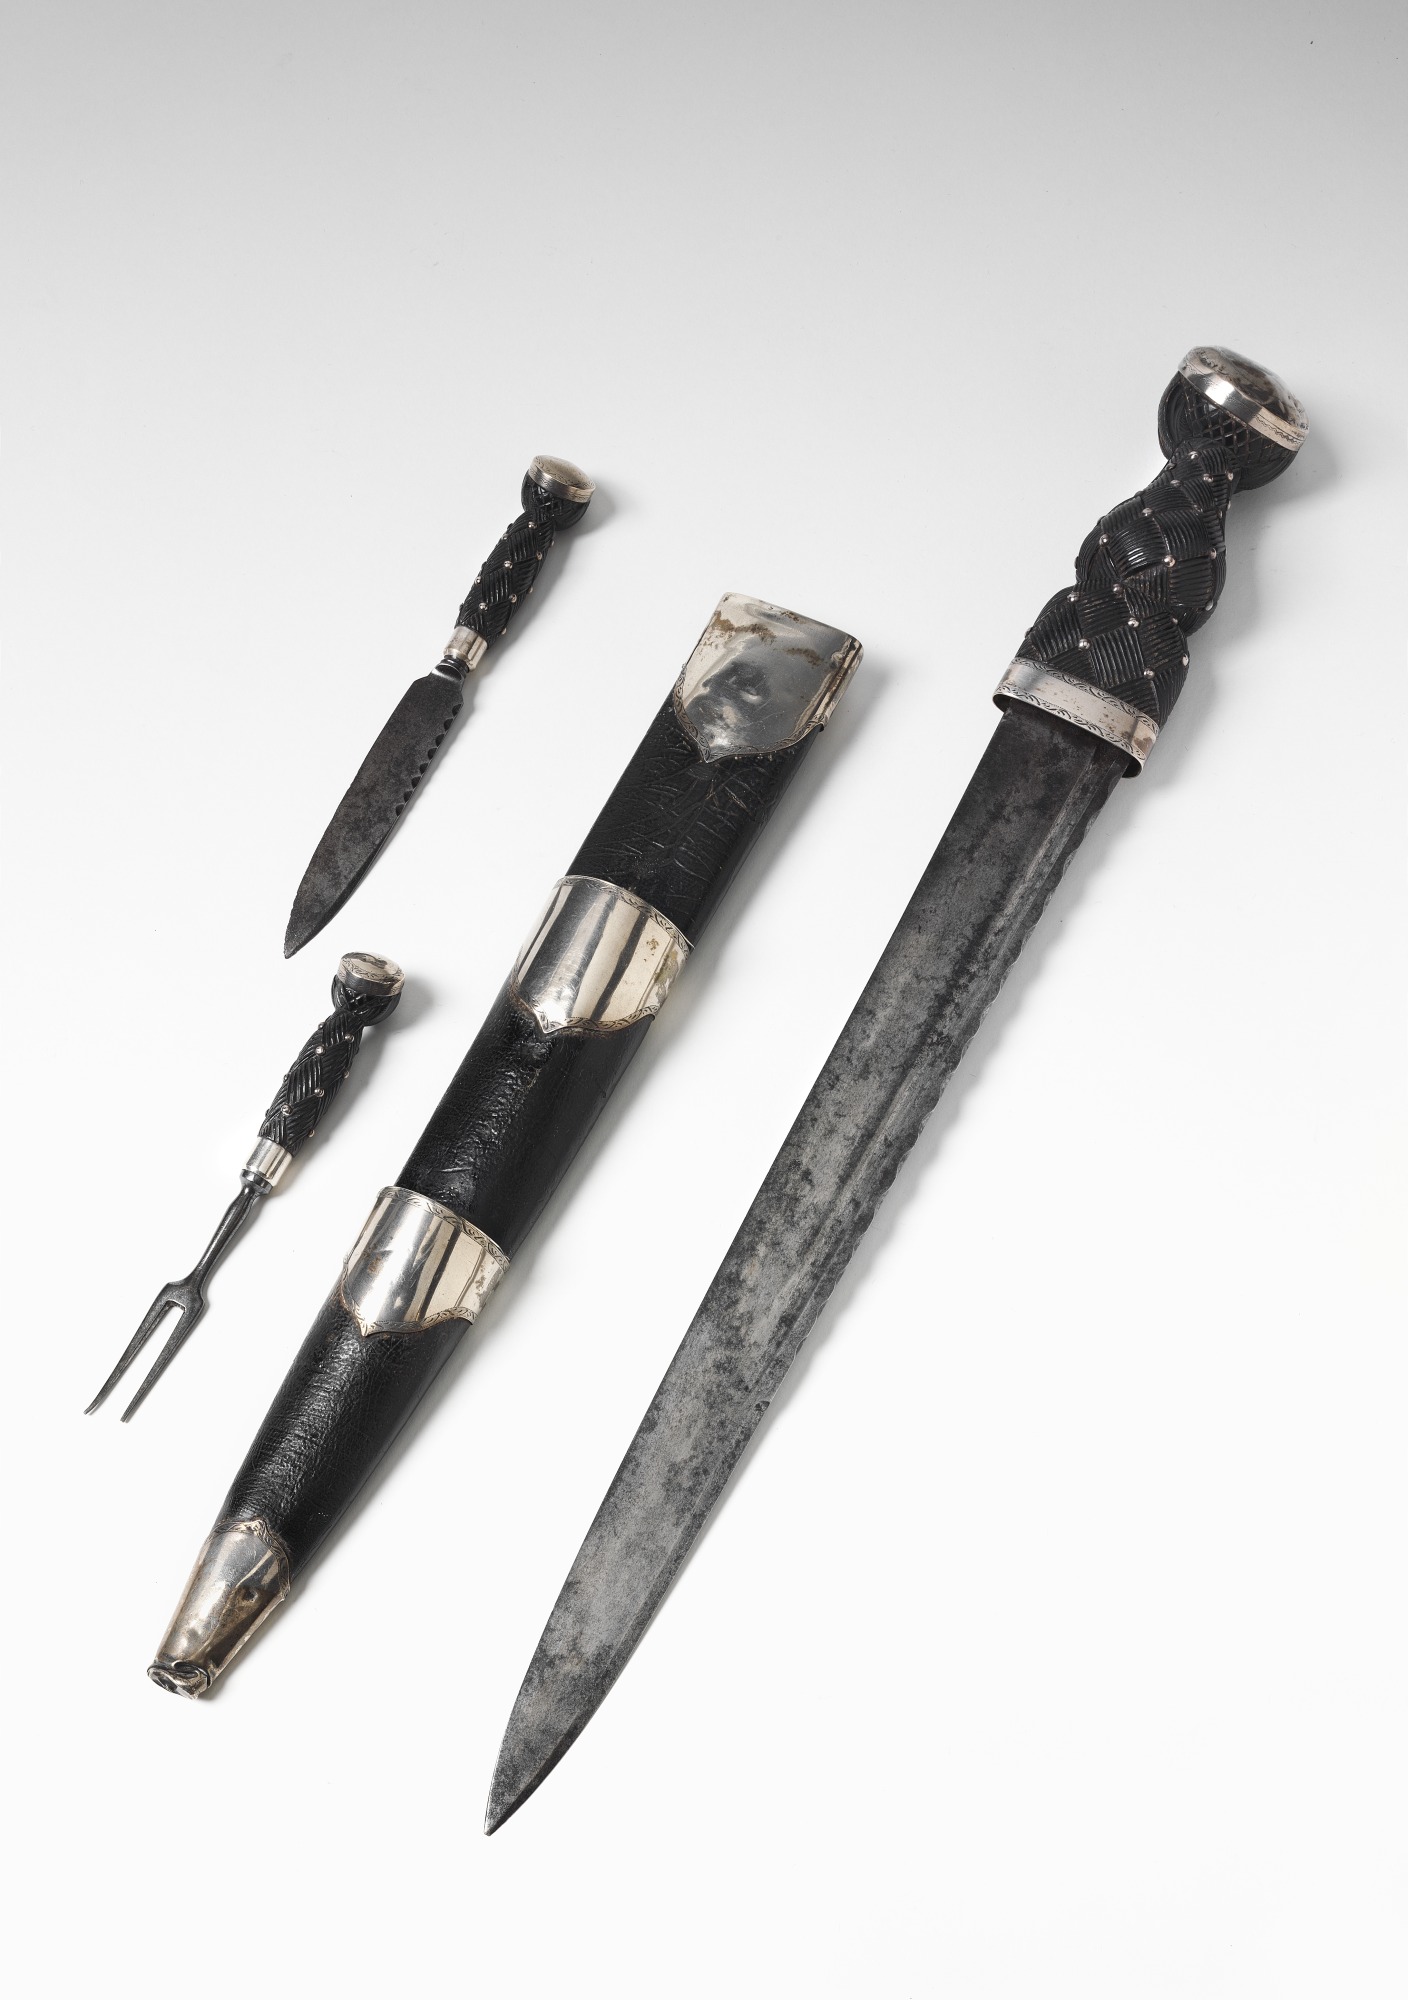 Dirk, scabbard, by-knife and fork used by New South Wales Colonial Governor Lachlan Macquarie